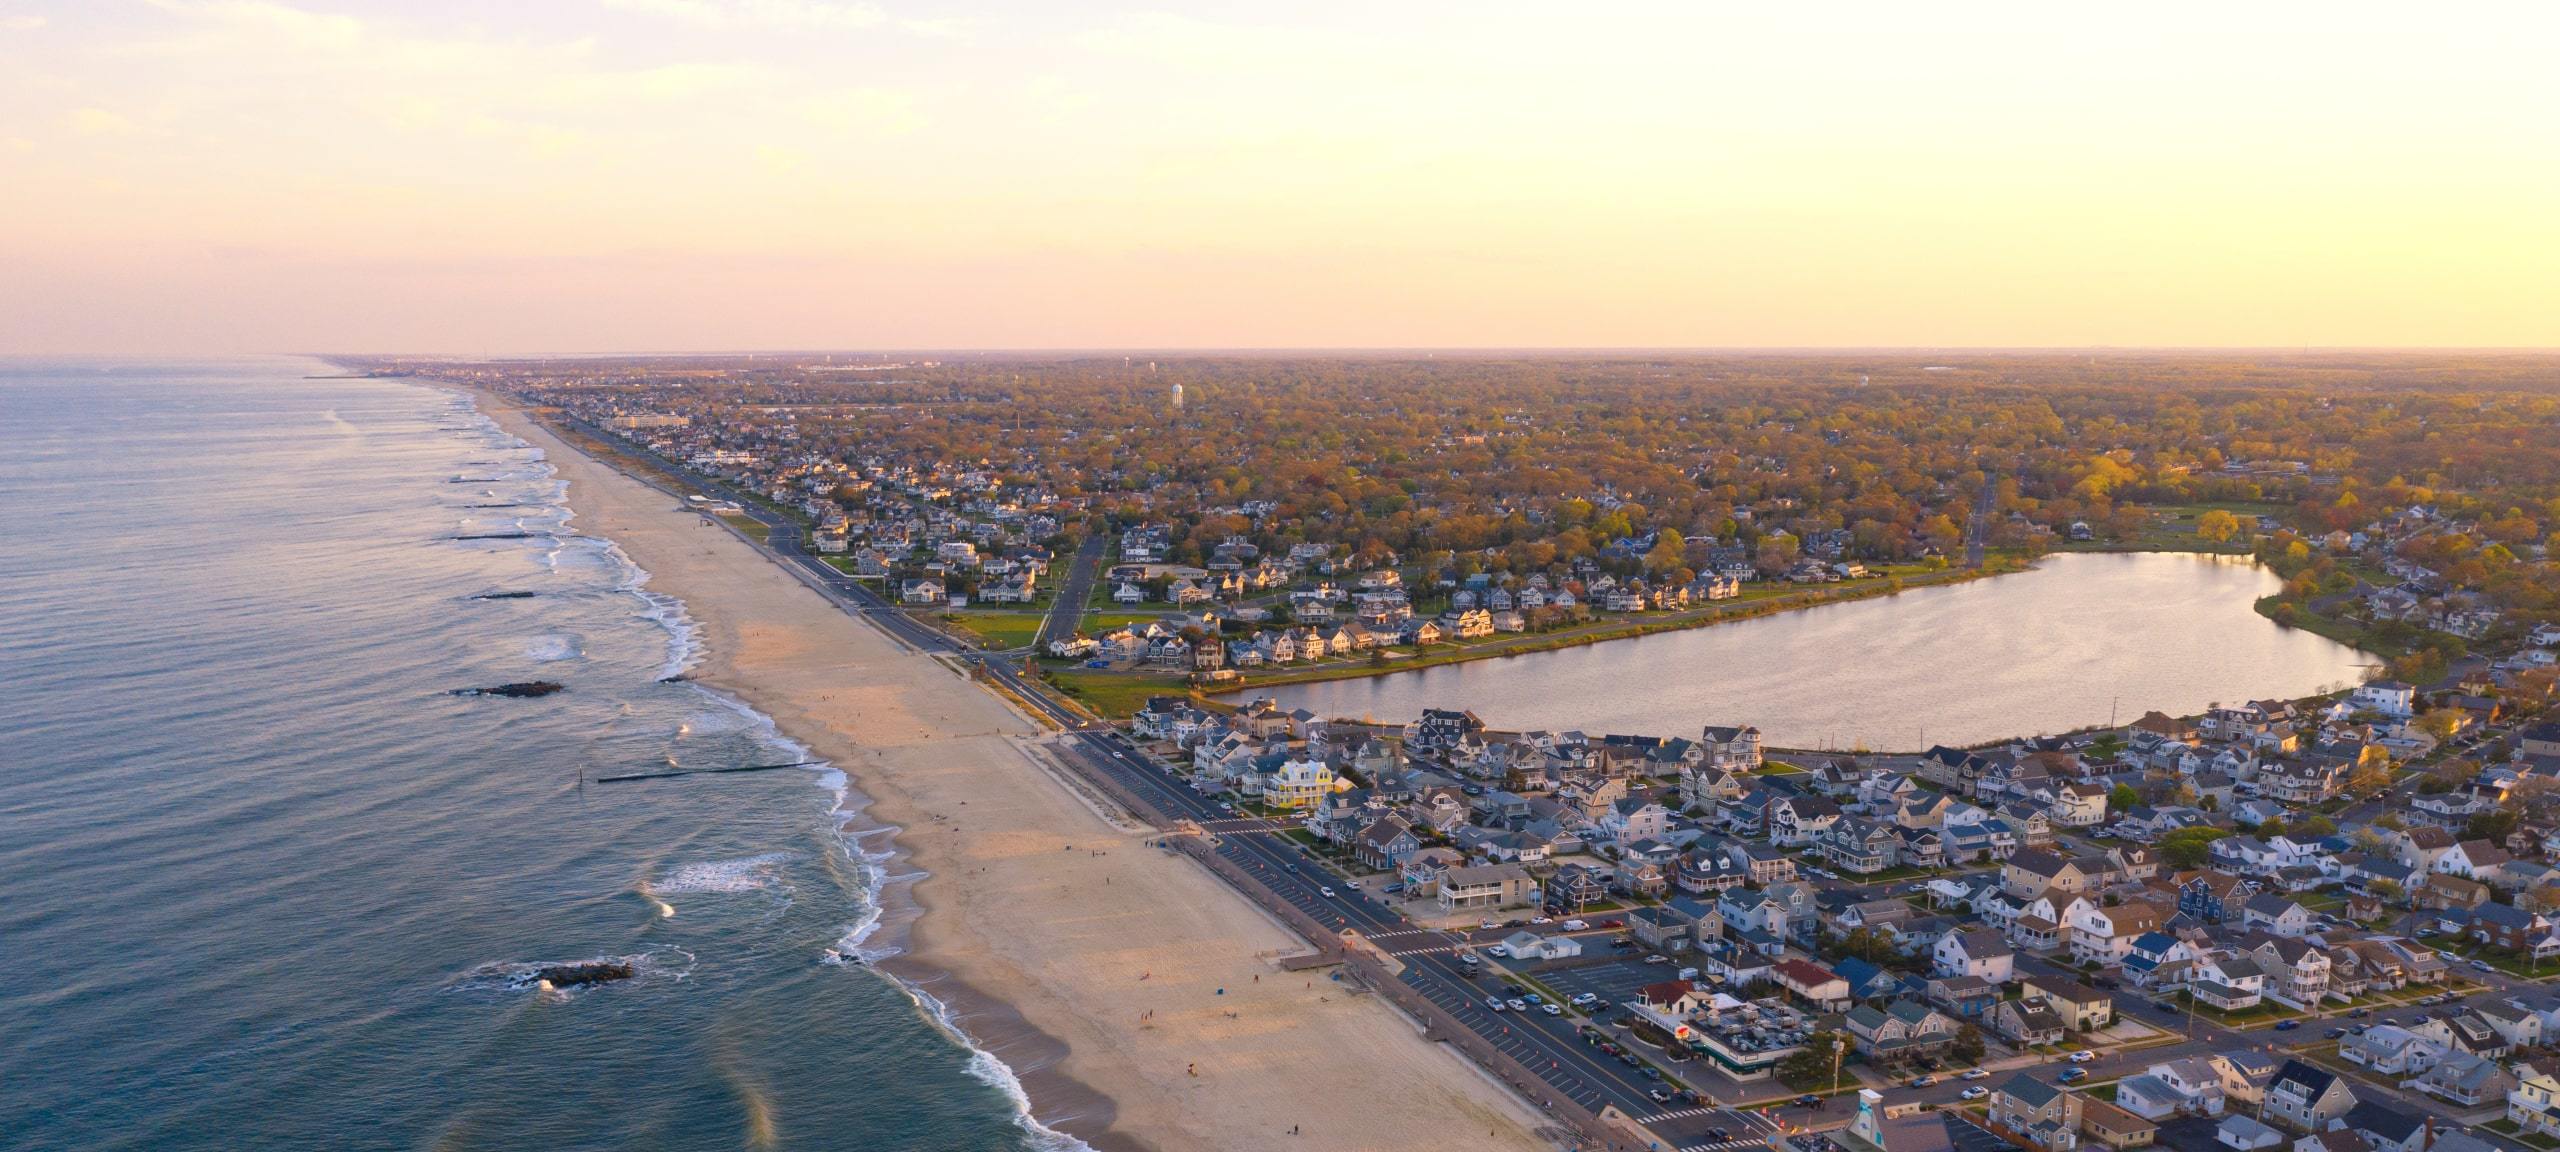 Aerial view over Belmar Beach and Lake Como, NJ during sunset